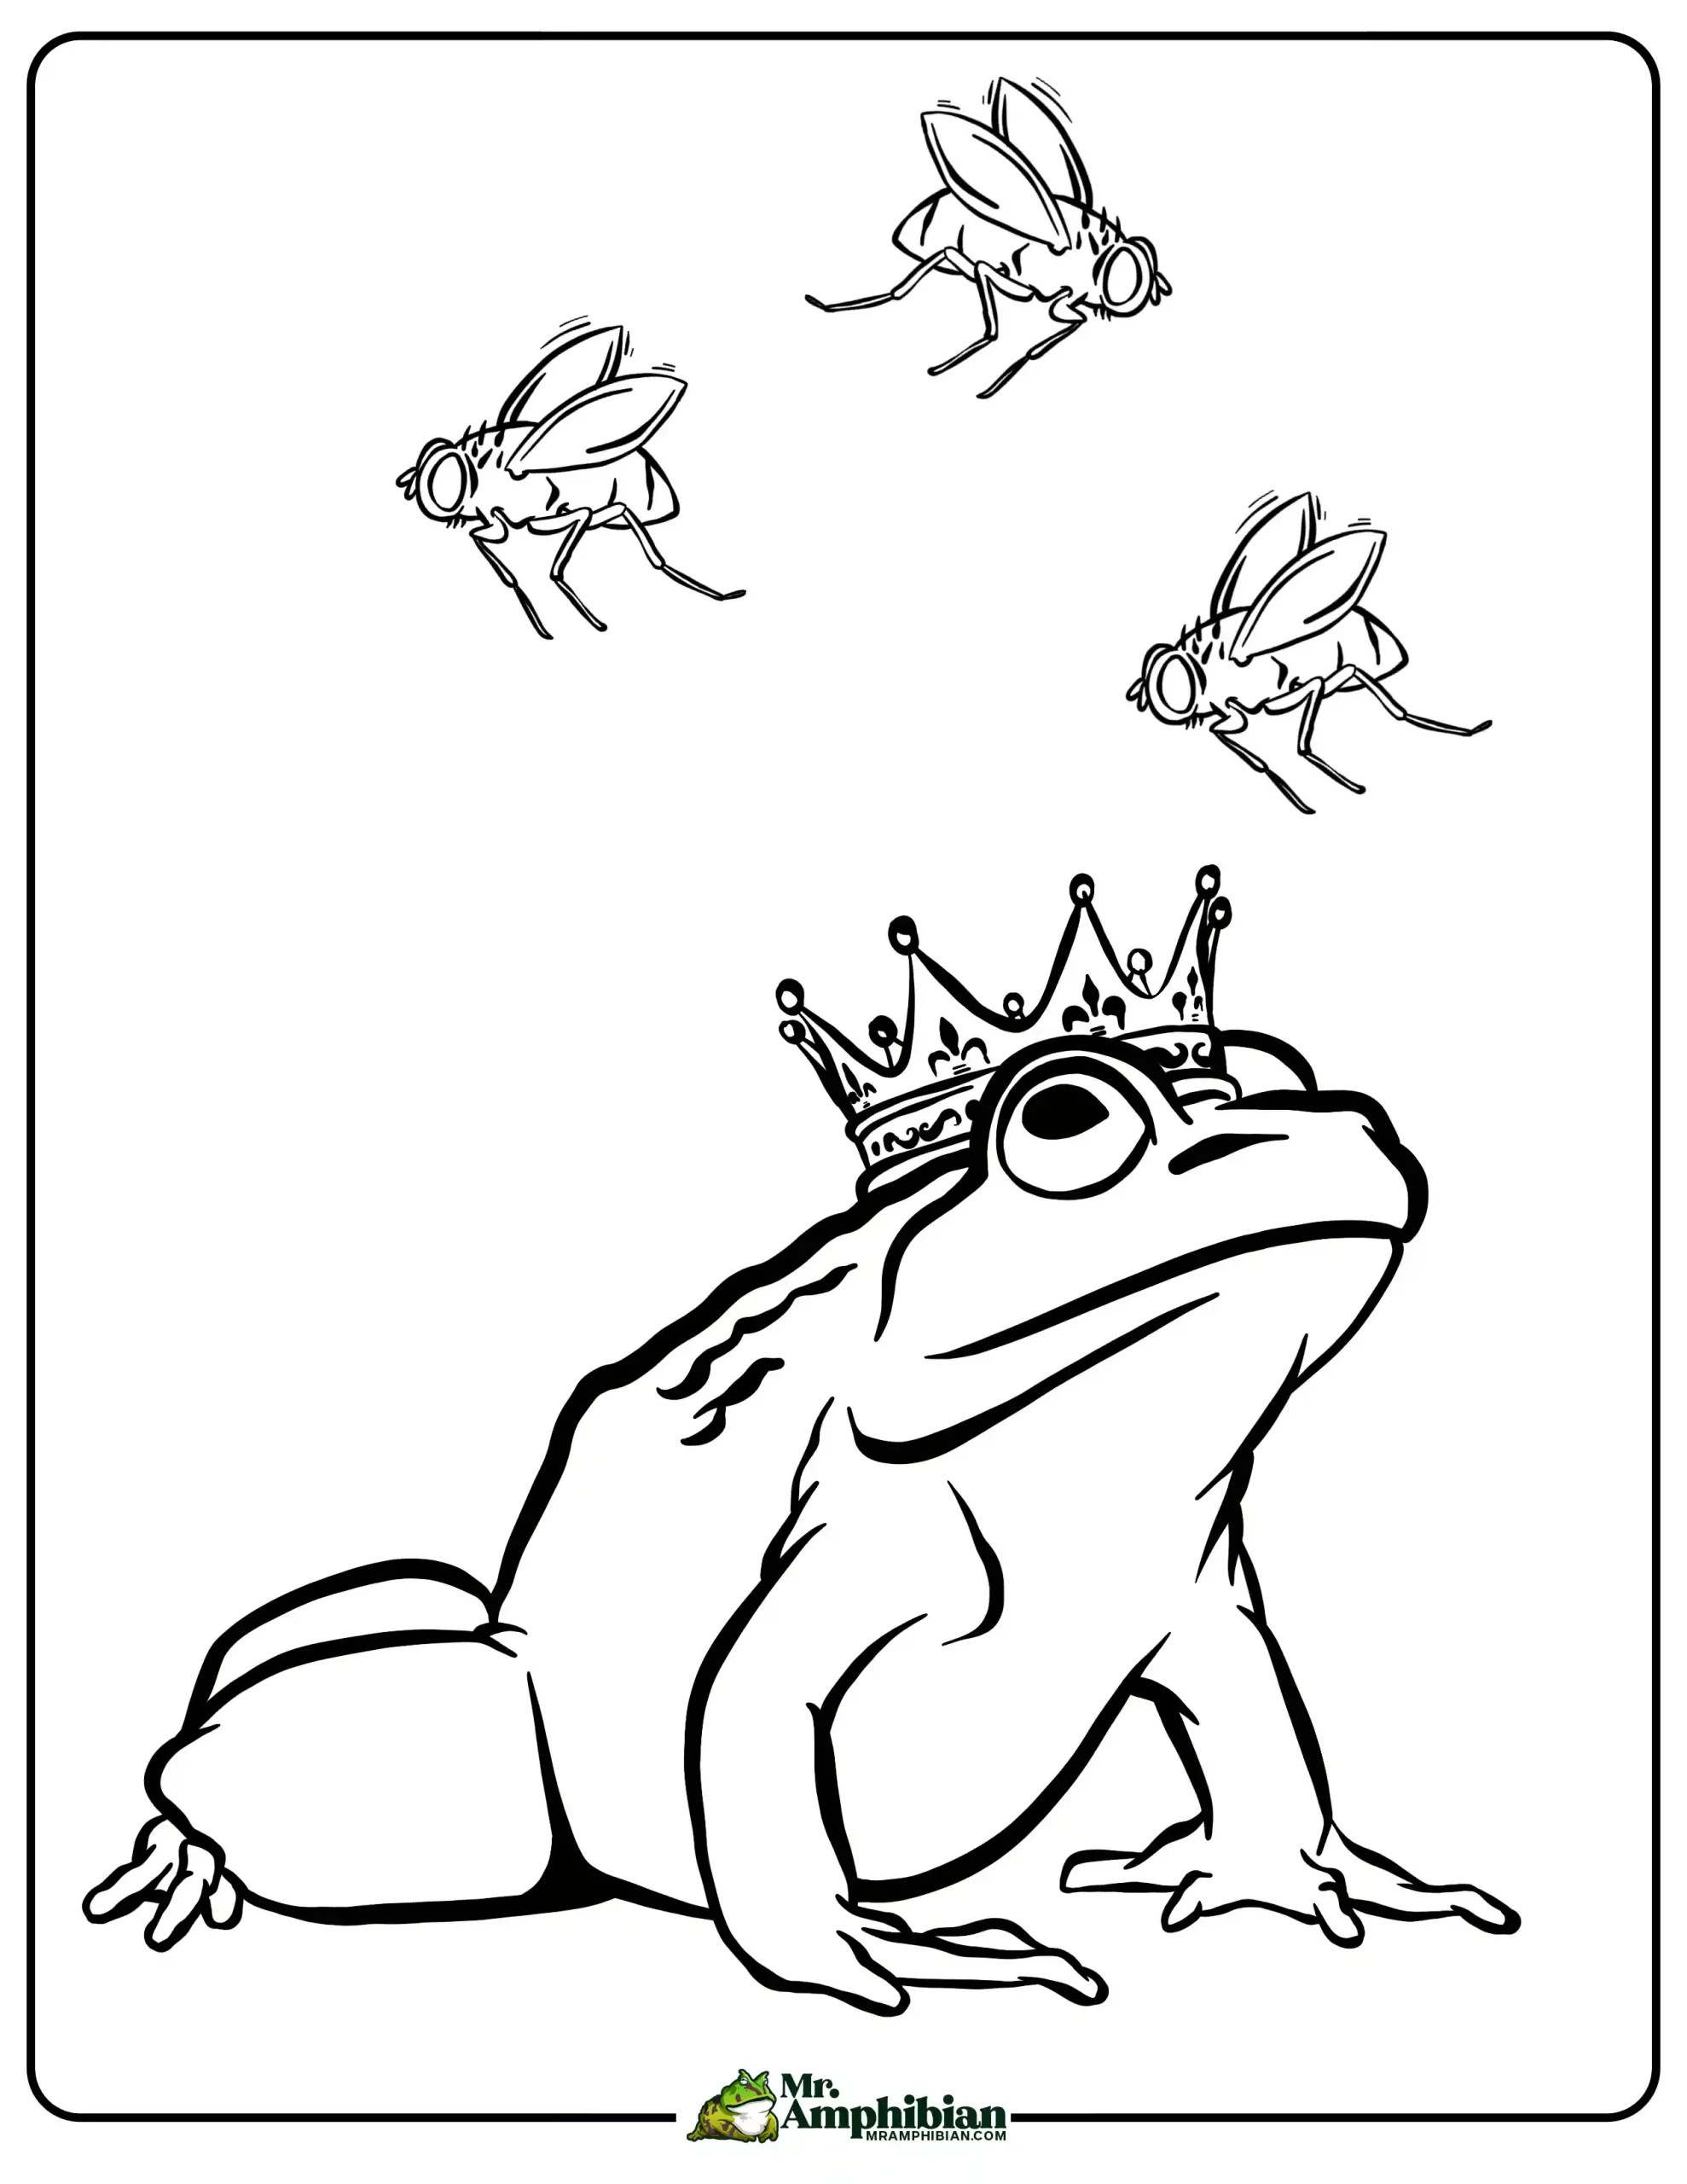 Toad Coloring Page 02